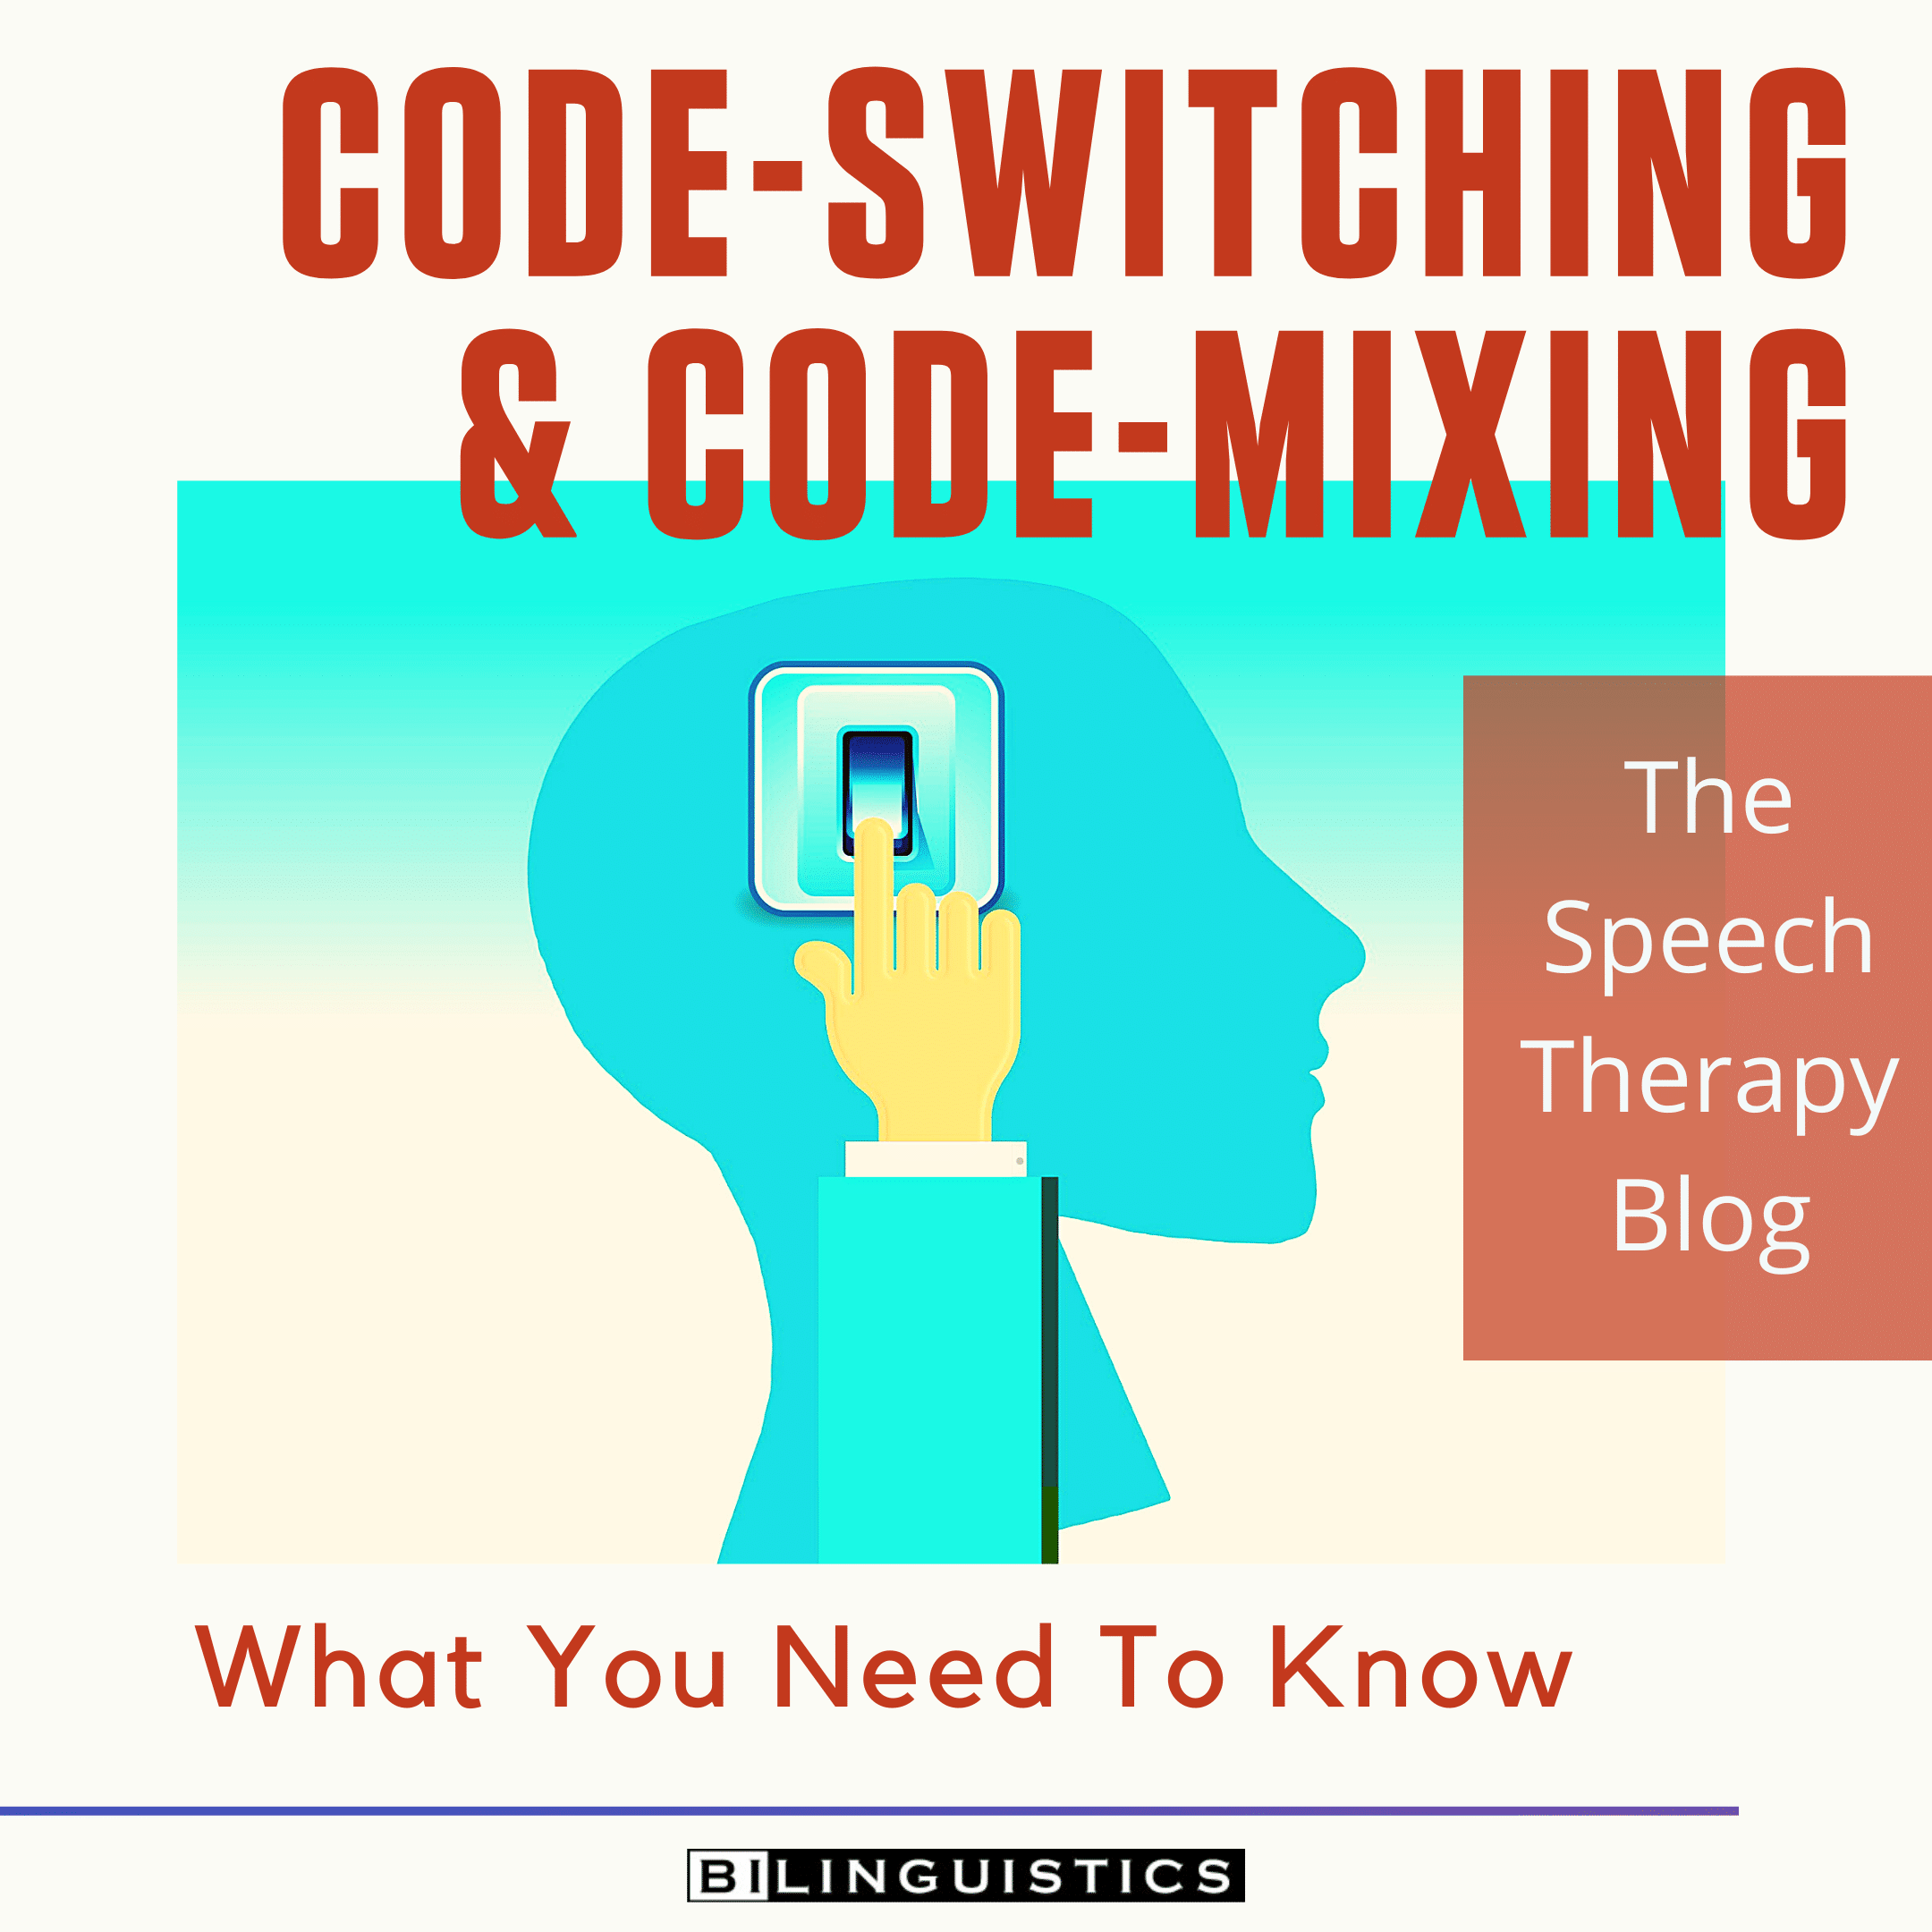 research about code switching